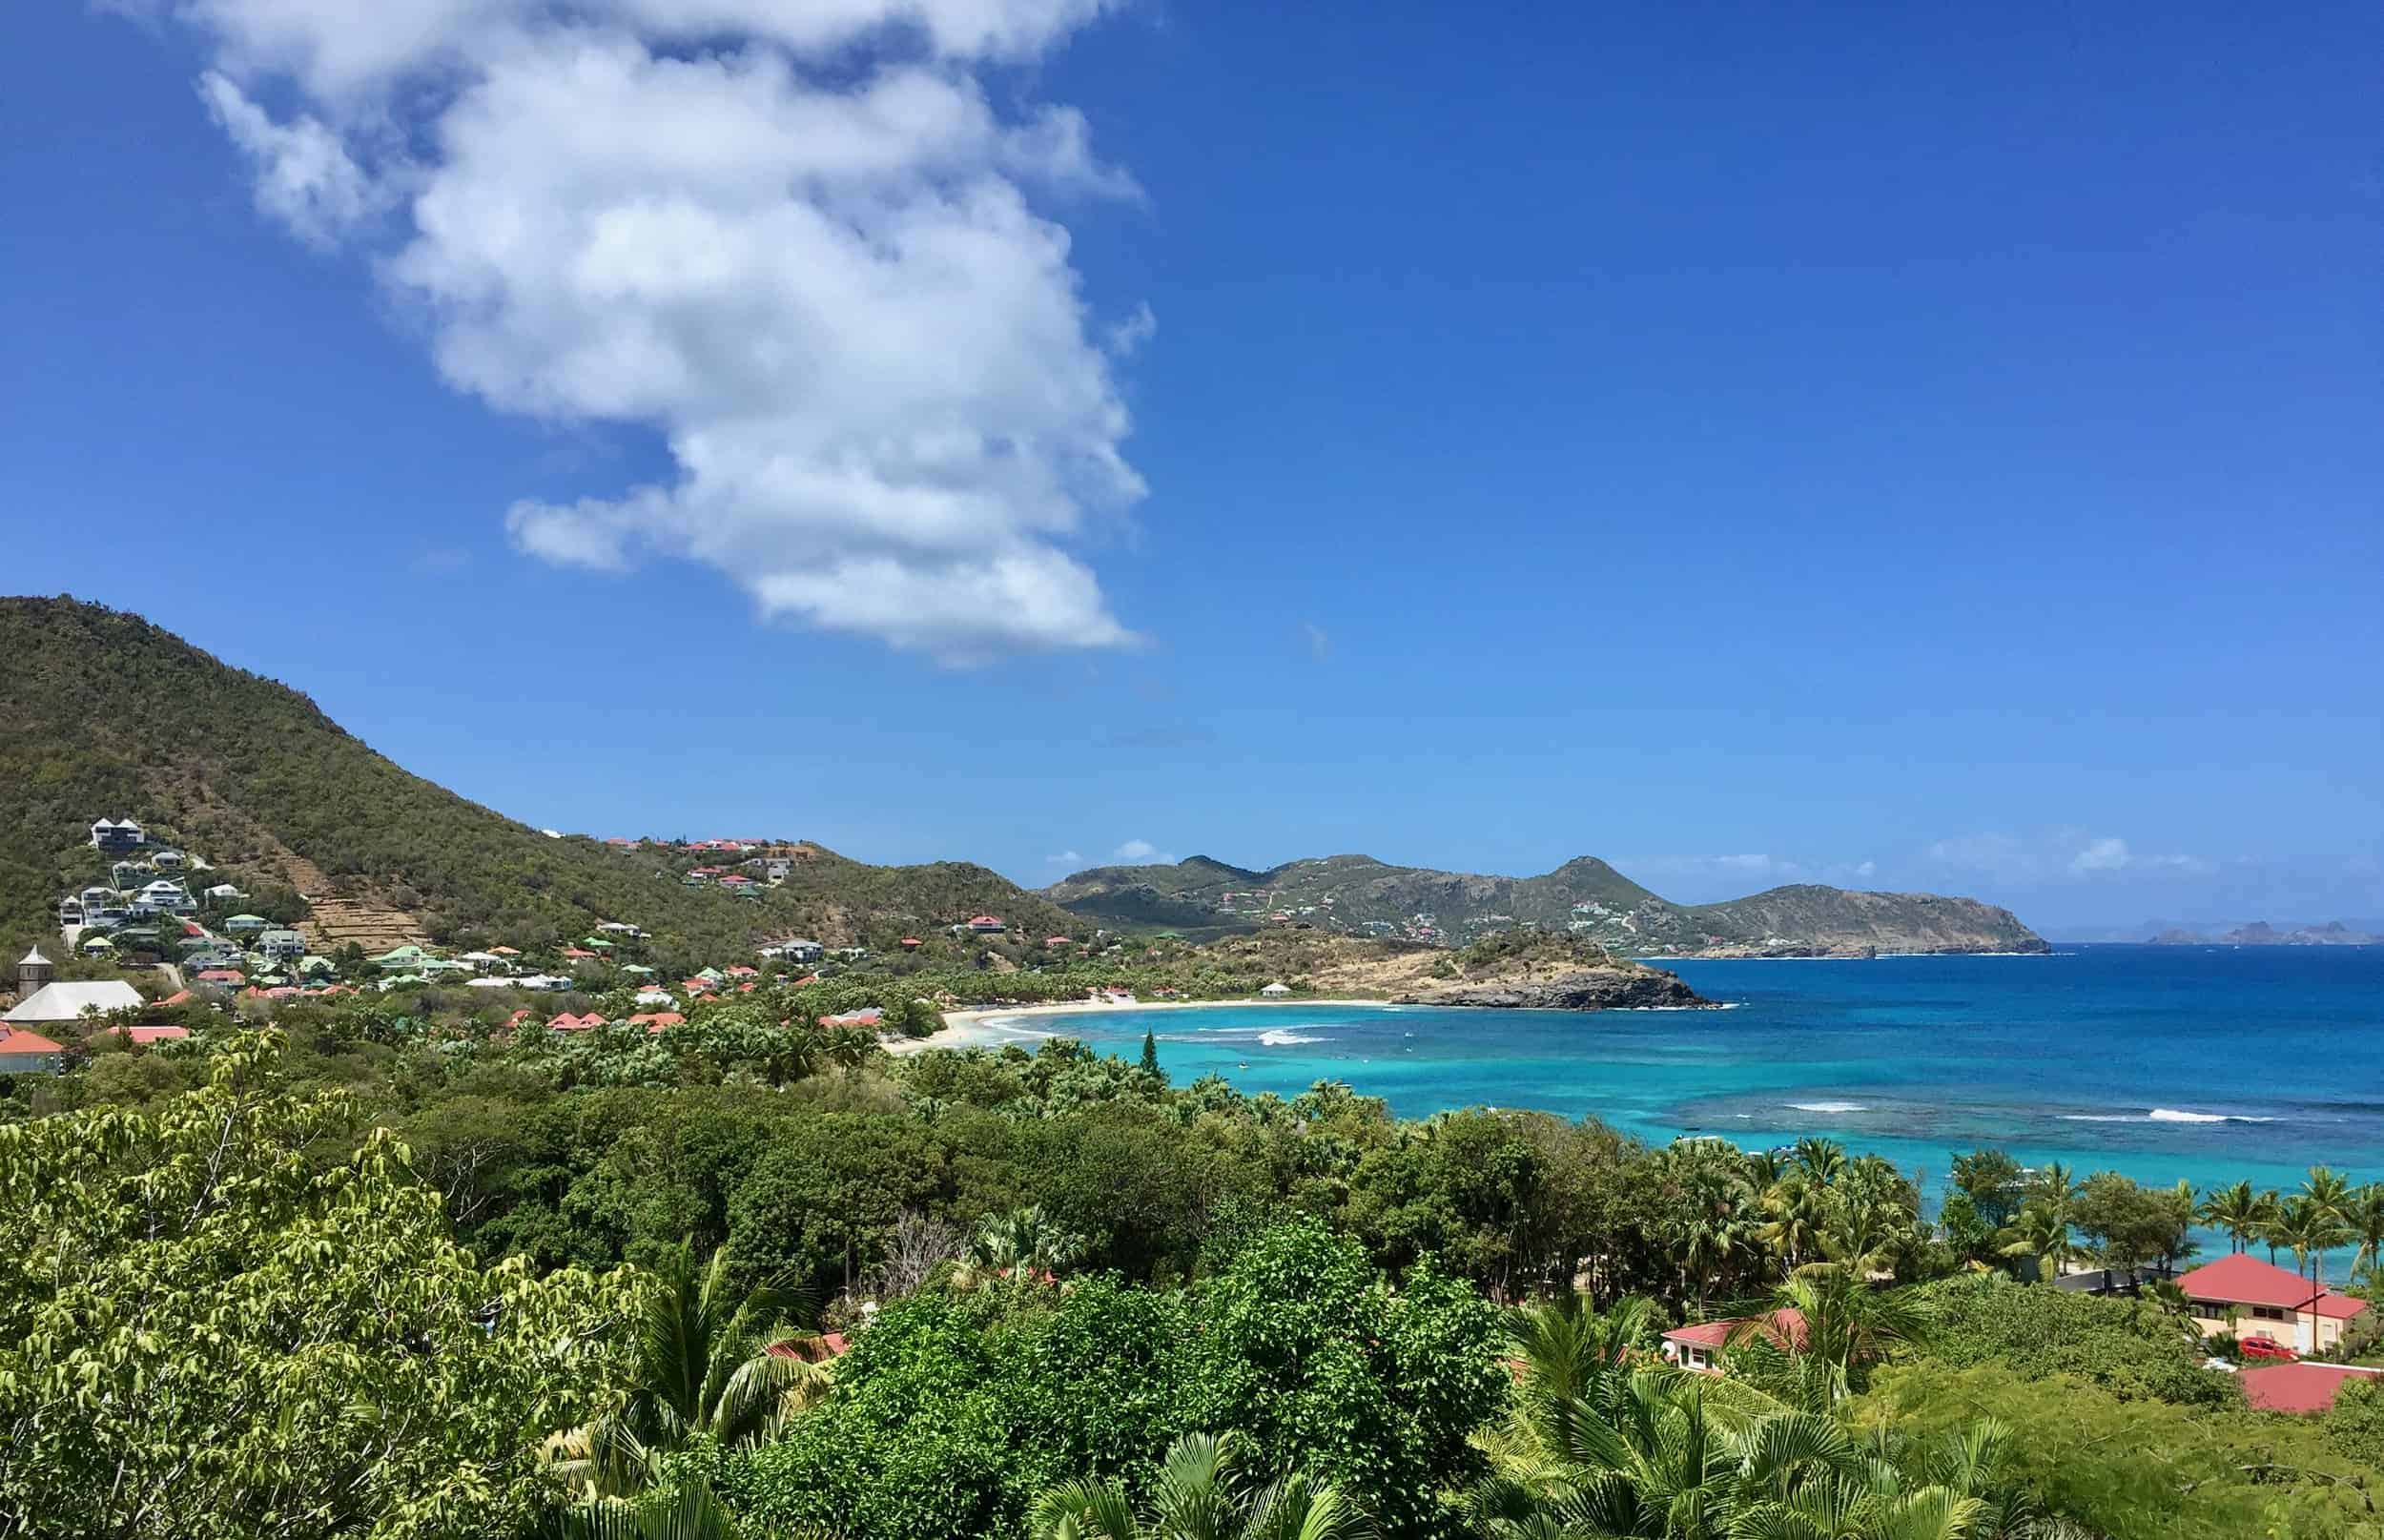 Recipe for Perfect Happiness…A Free Trip to St. Bart’s!